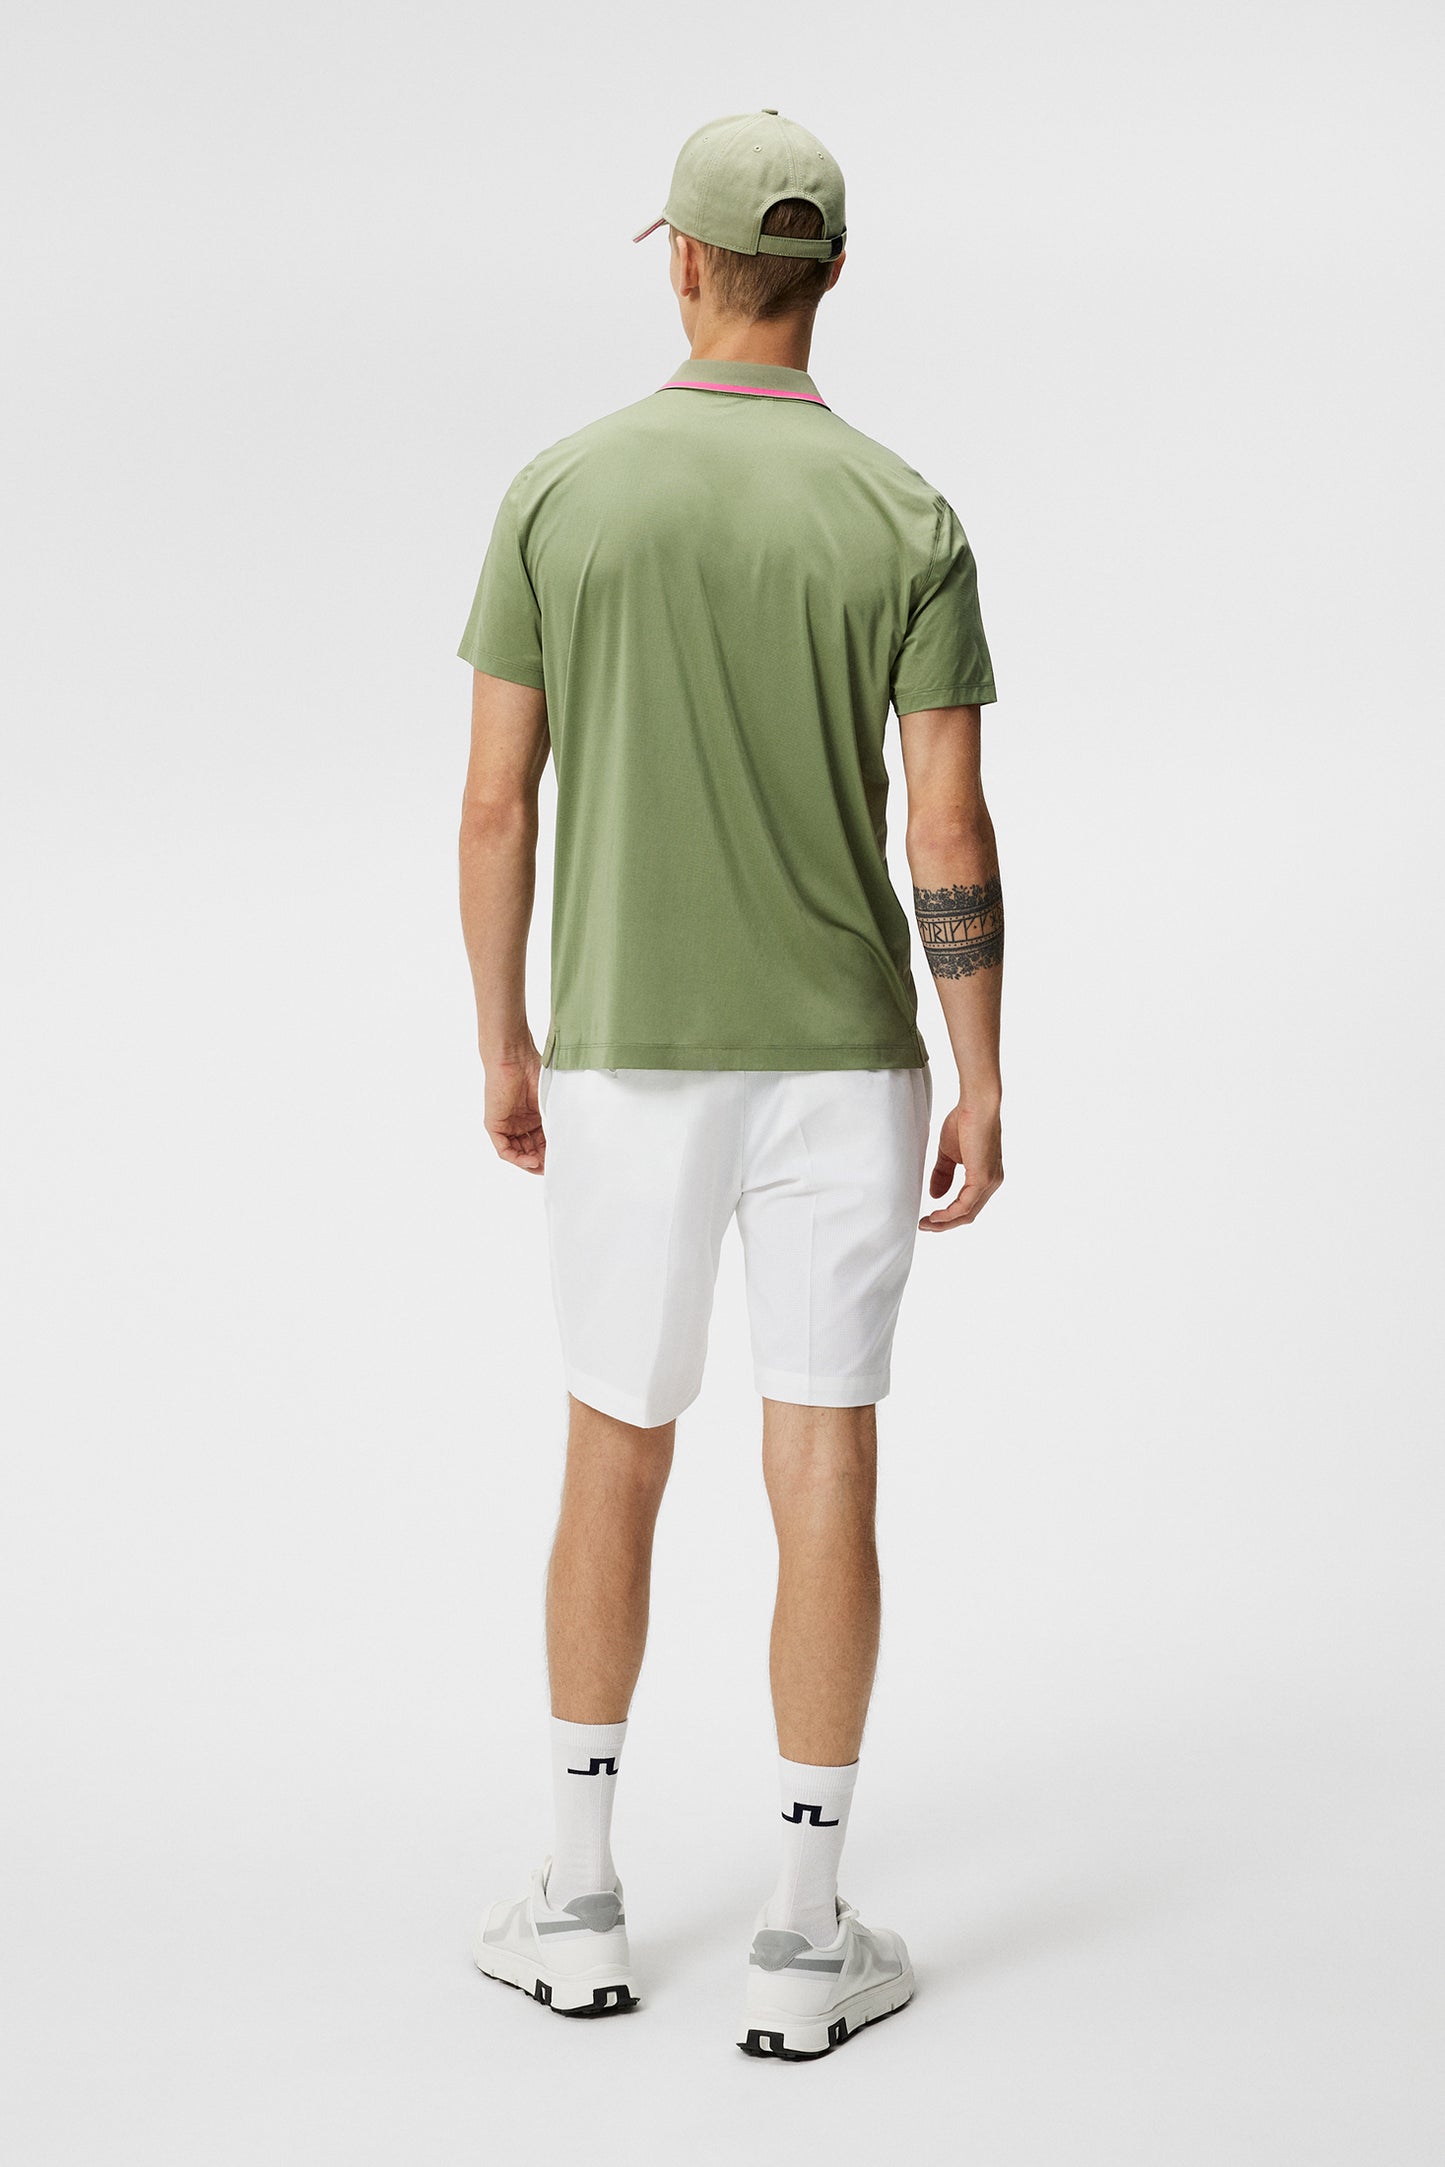 Fryes Regular Fit Polo / Oil Green